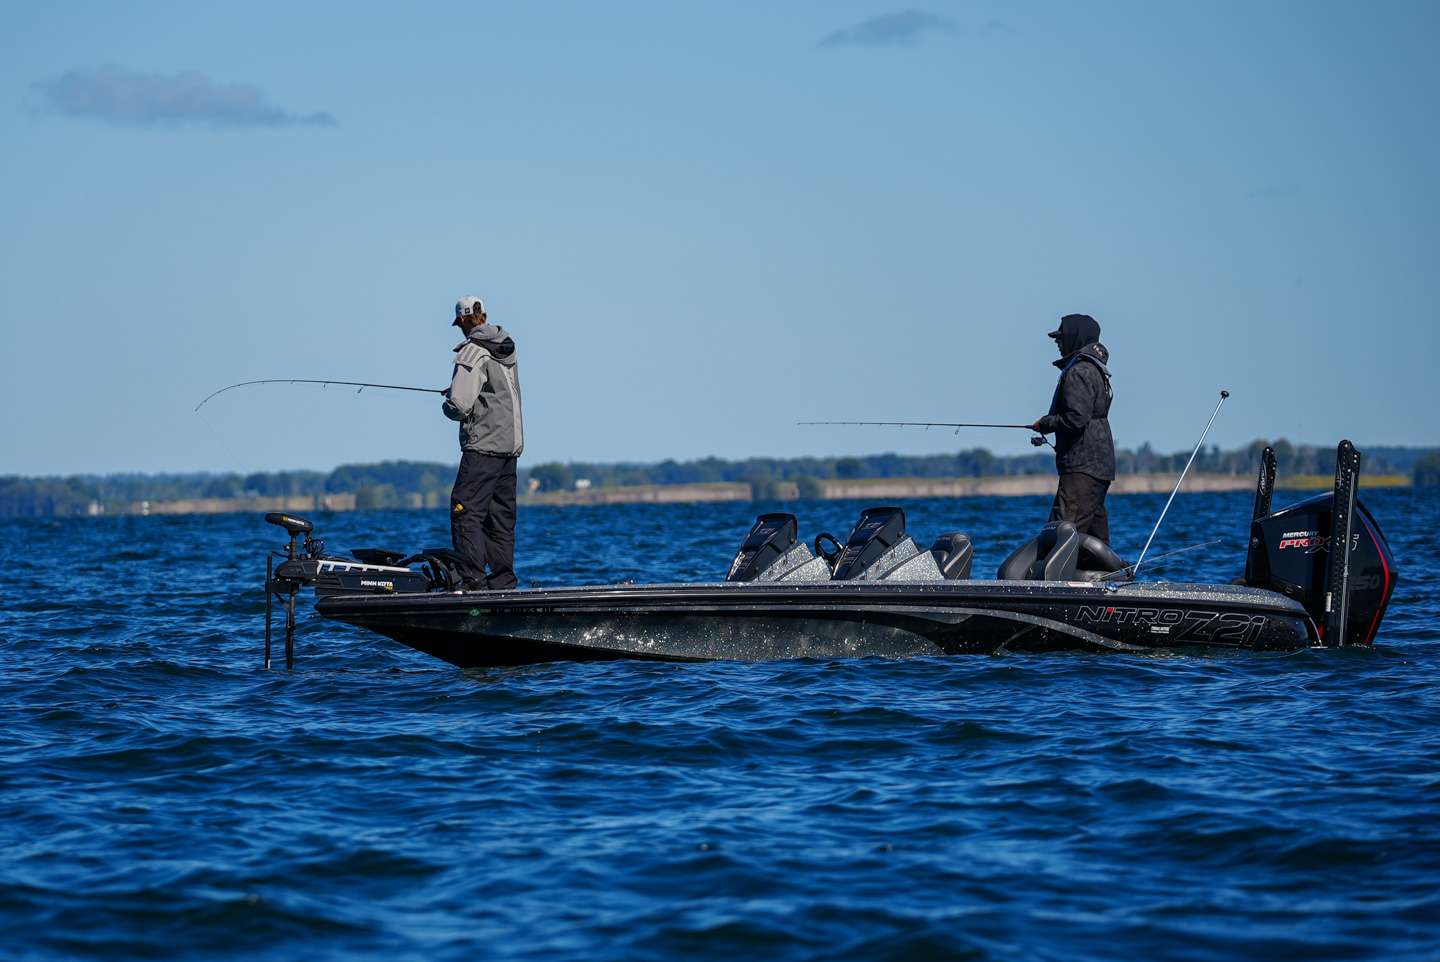 Get a look at early Day 2 action as the pros and cos search for more big smallies at 1000 Islands in New York.